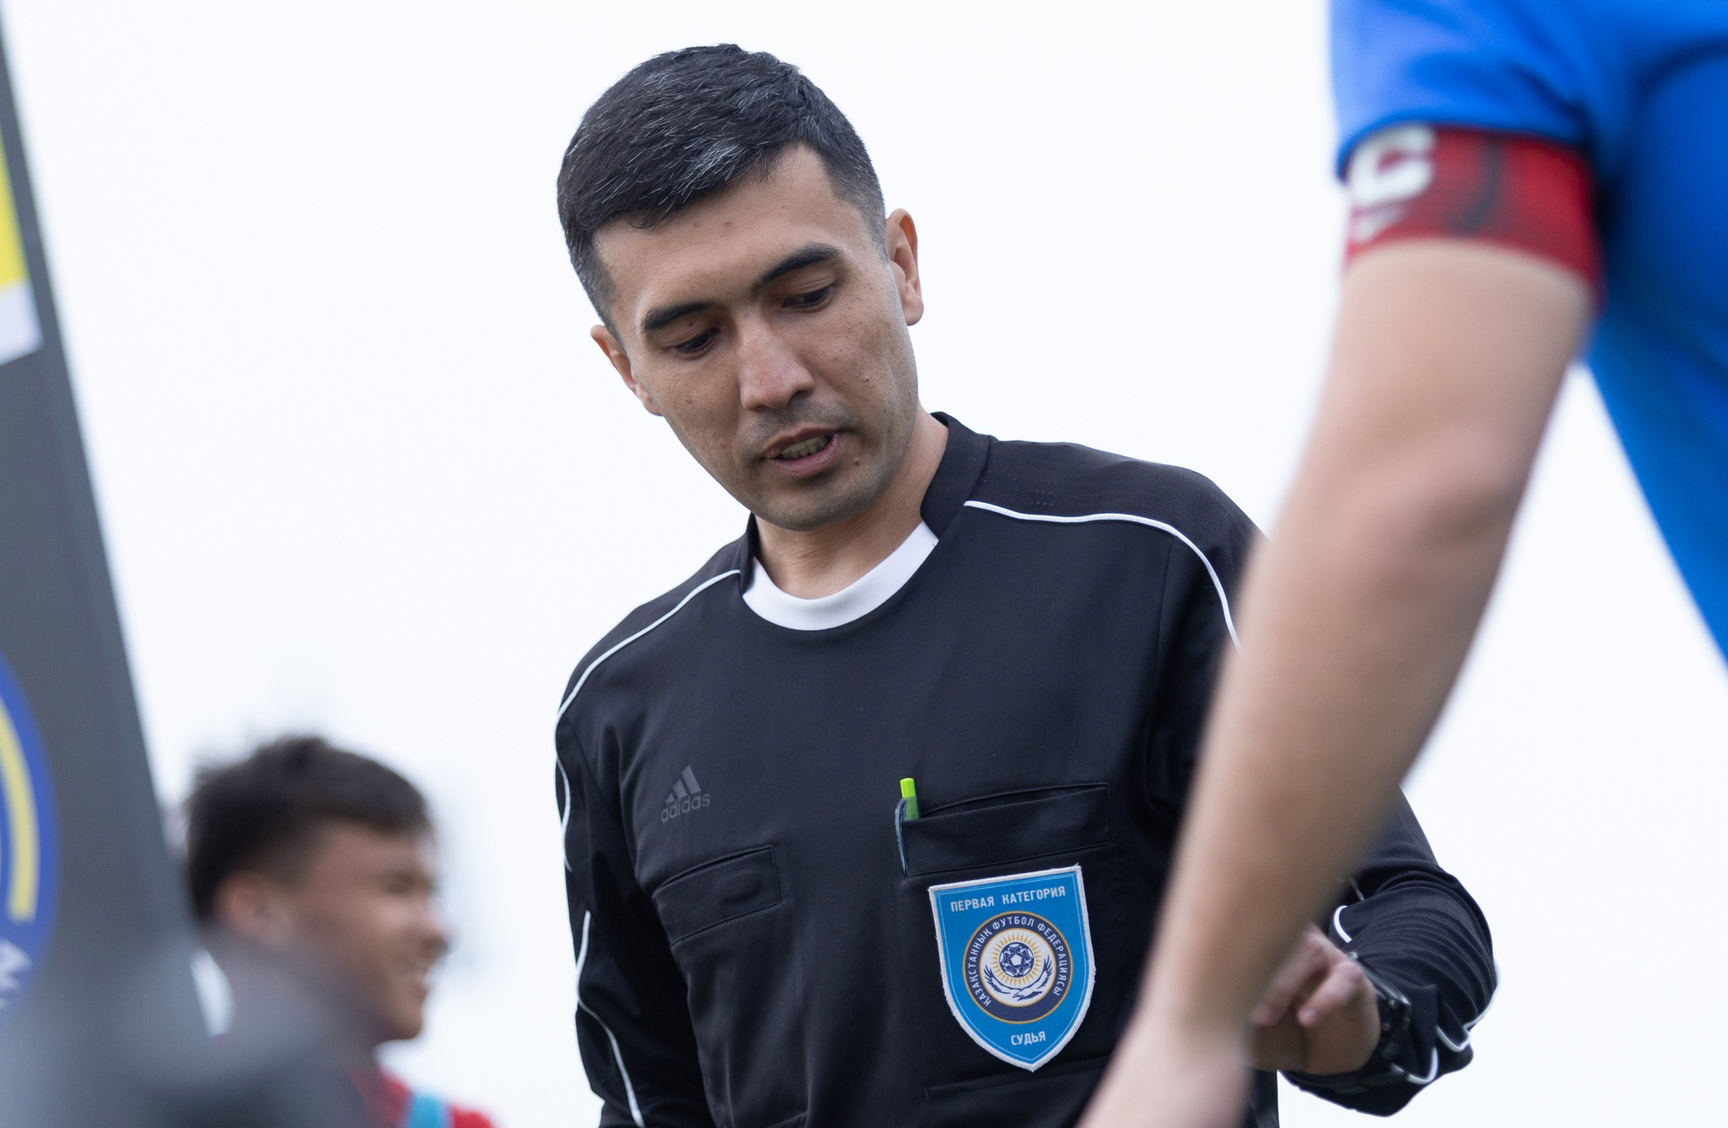 Nurzhan Zhumashev is the head referee of the youth match between Aktobe and Shakhter